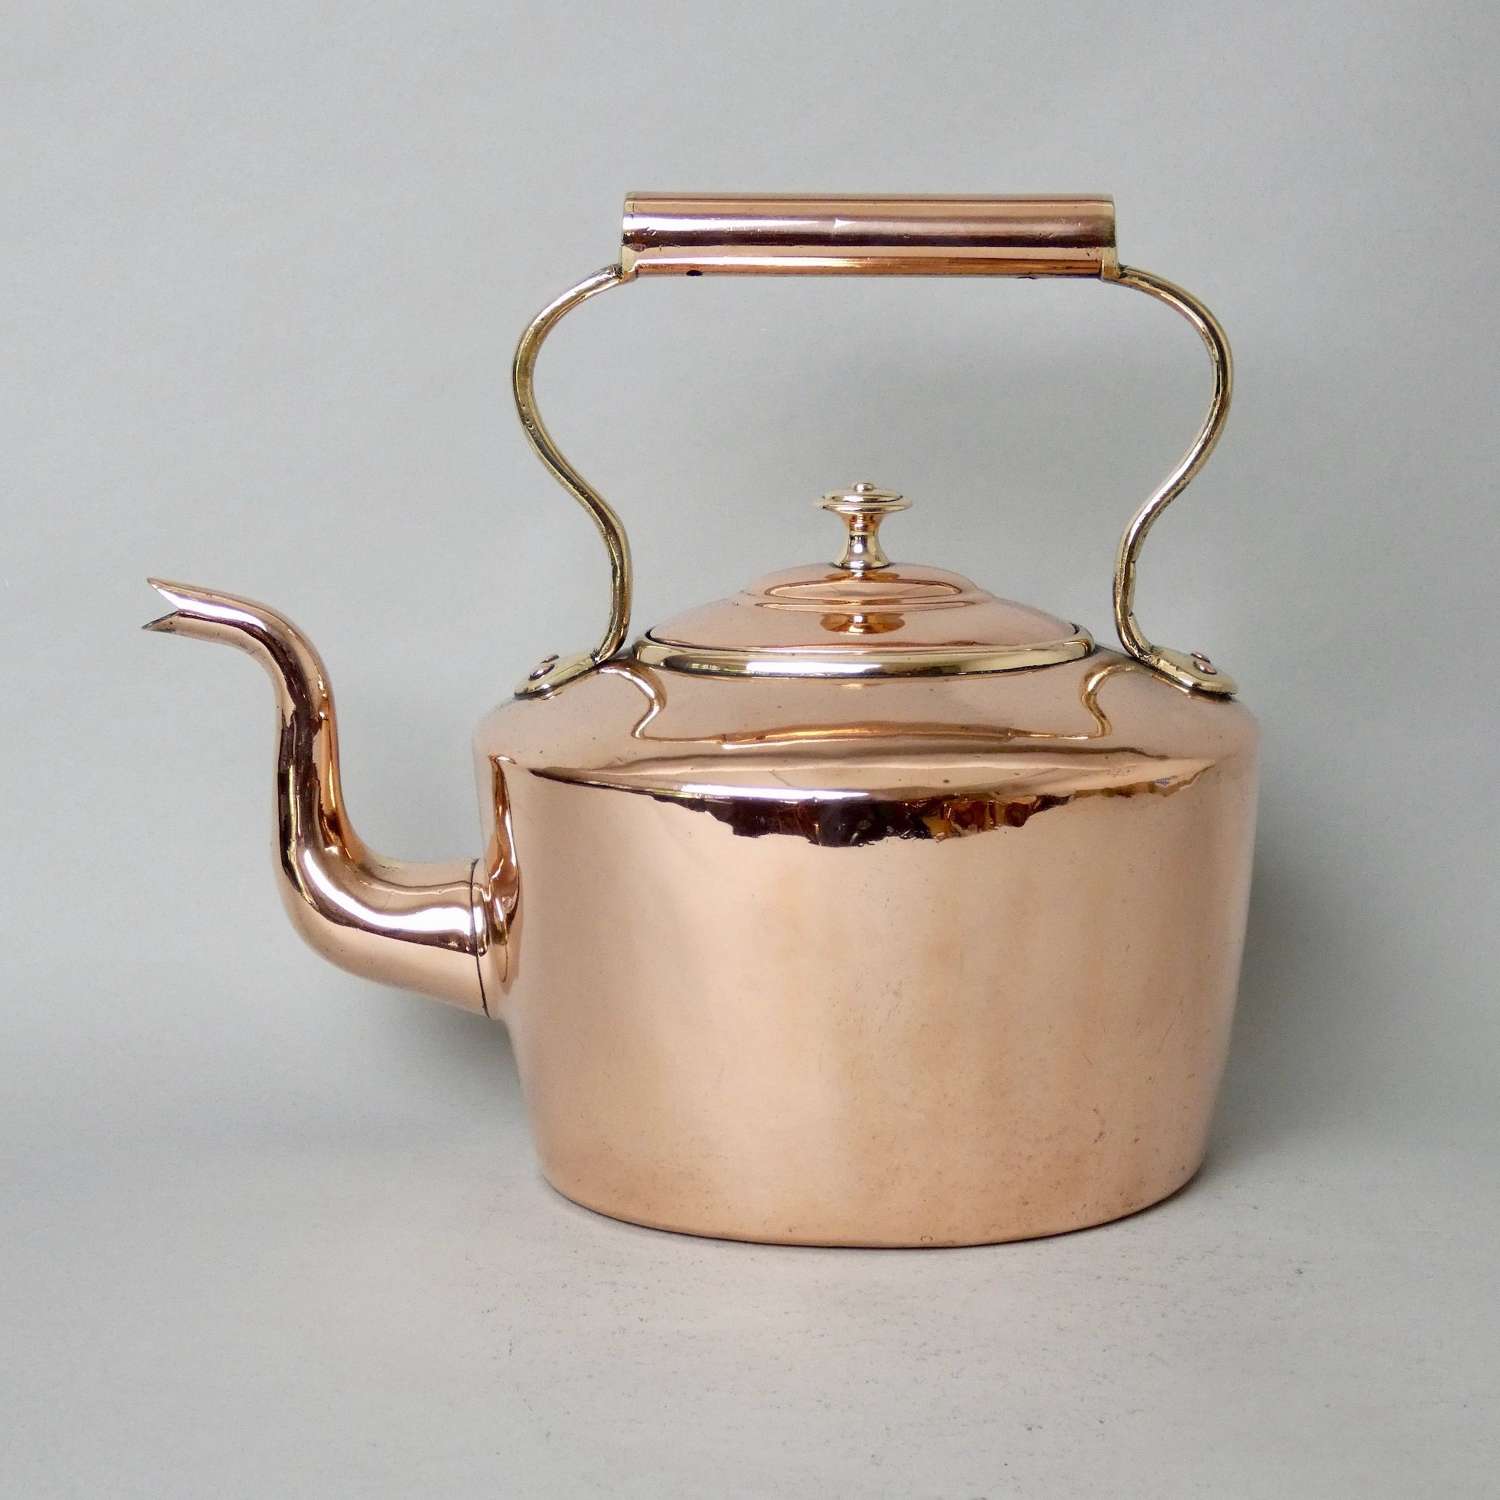 Small, oval copper kettle